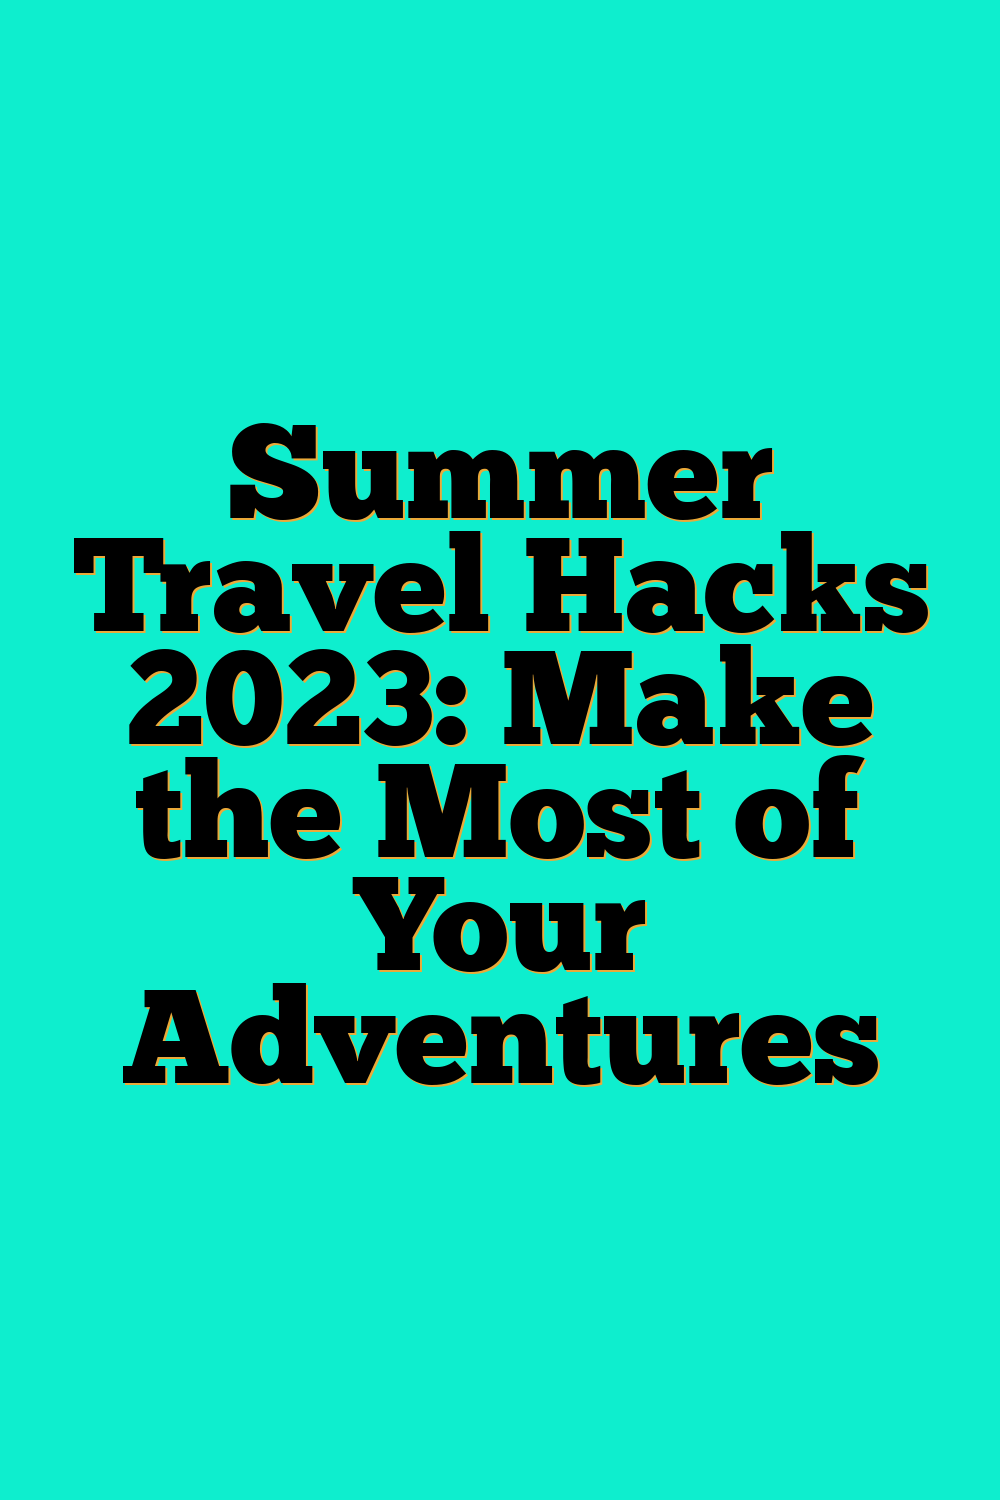 Summer Travel Hacks 2023: Make the Most of Your Adventures